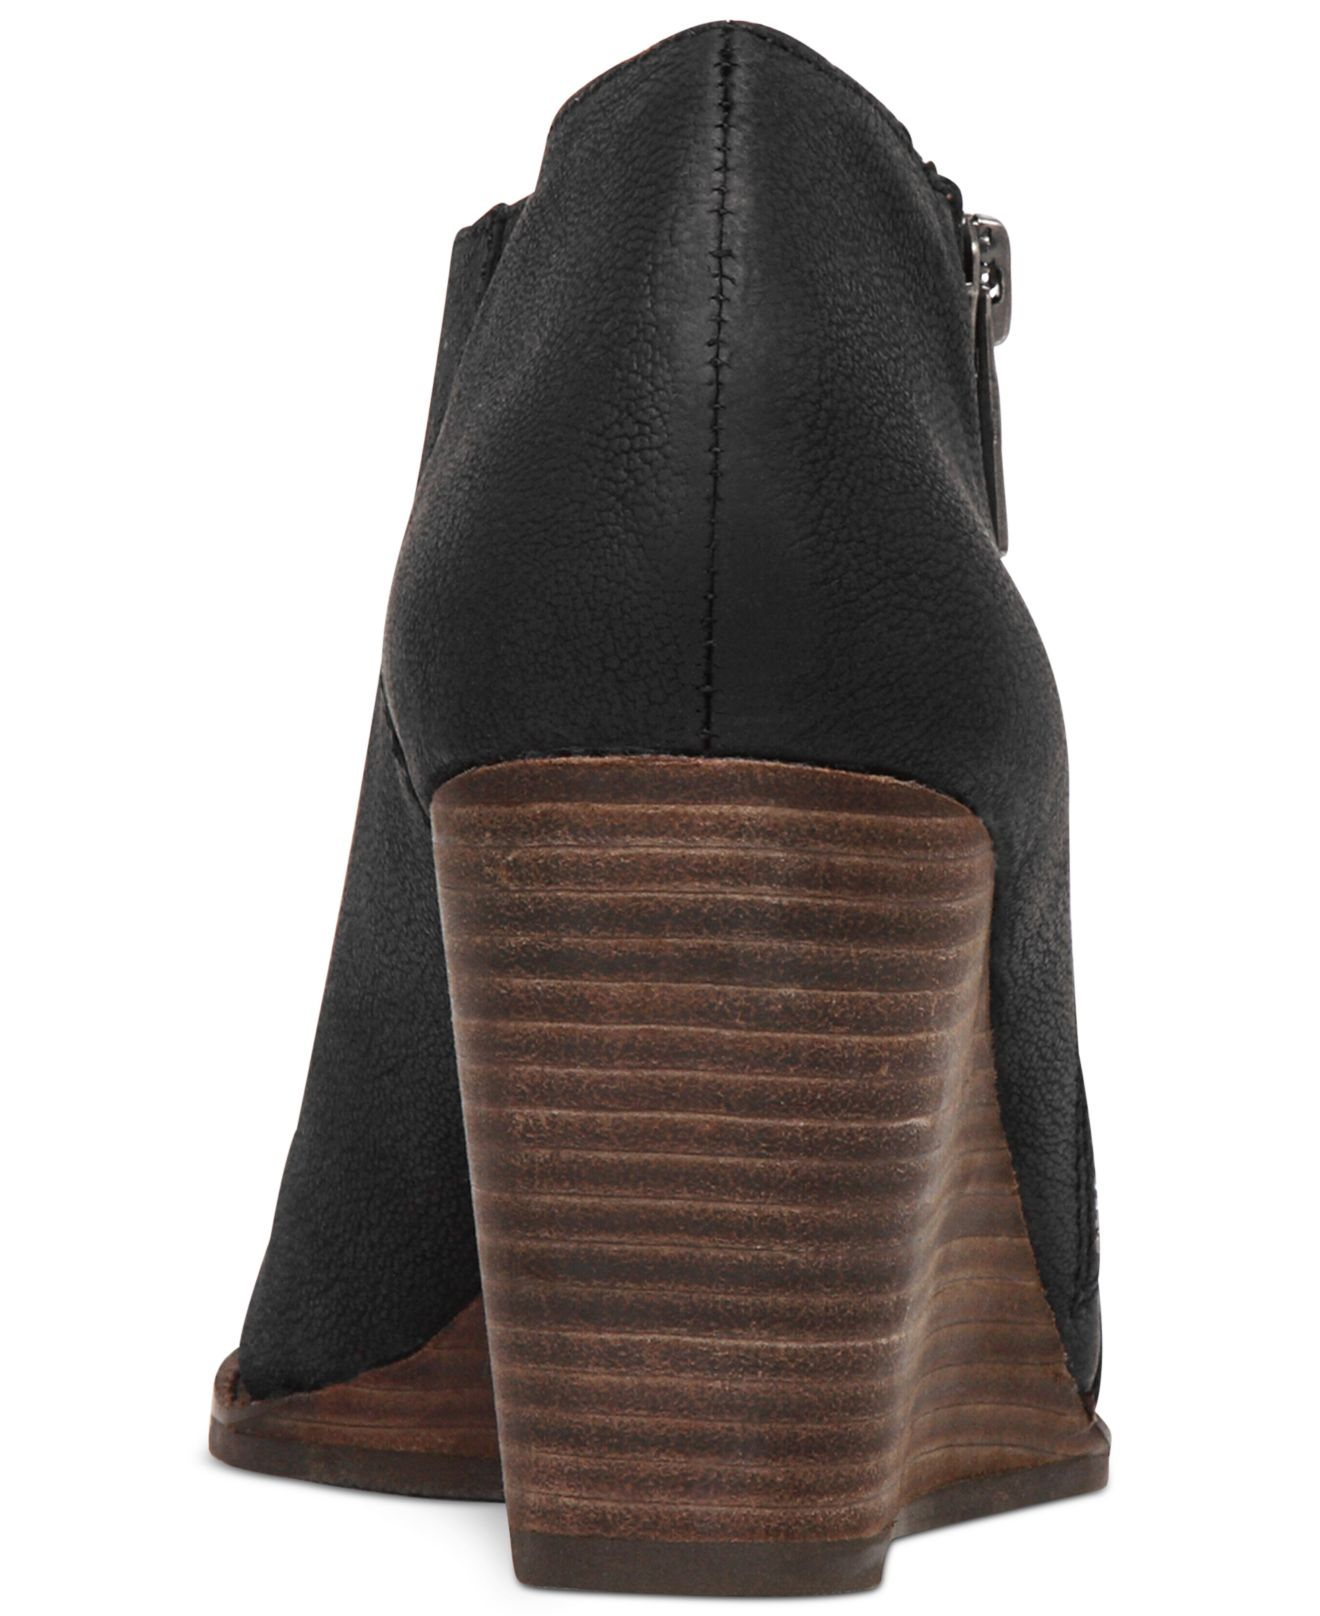 black wedge booties with conchos